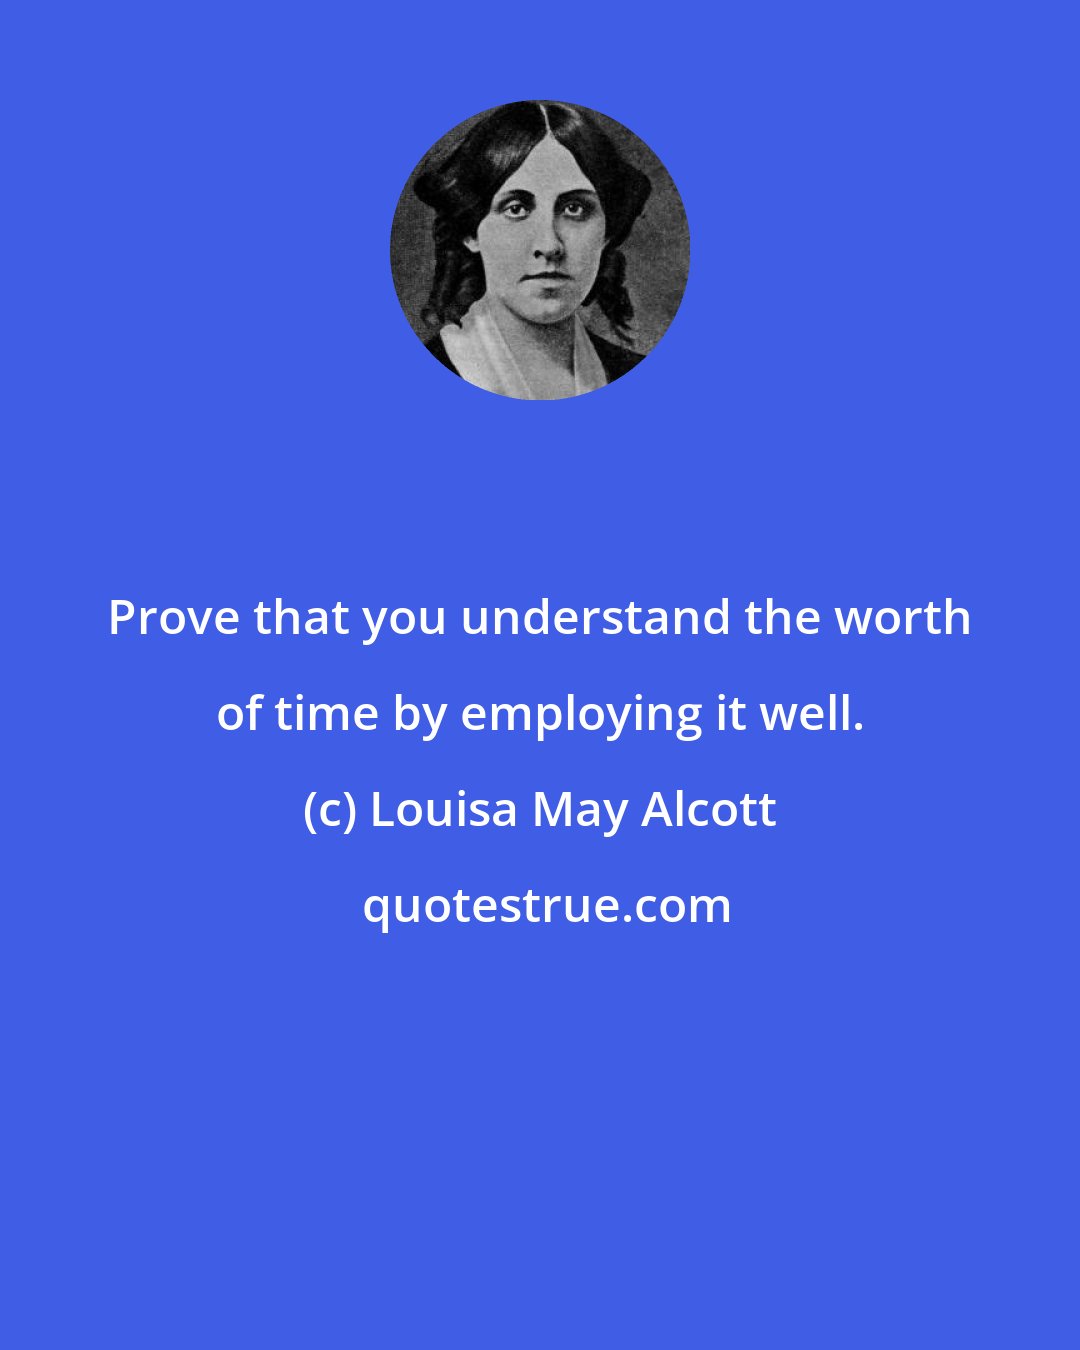 Louisa May Alcott: Prove that you understand the worth of time by employing it well.